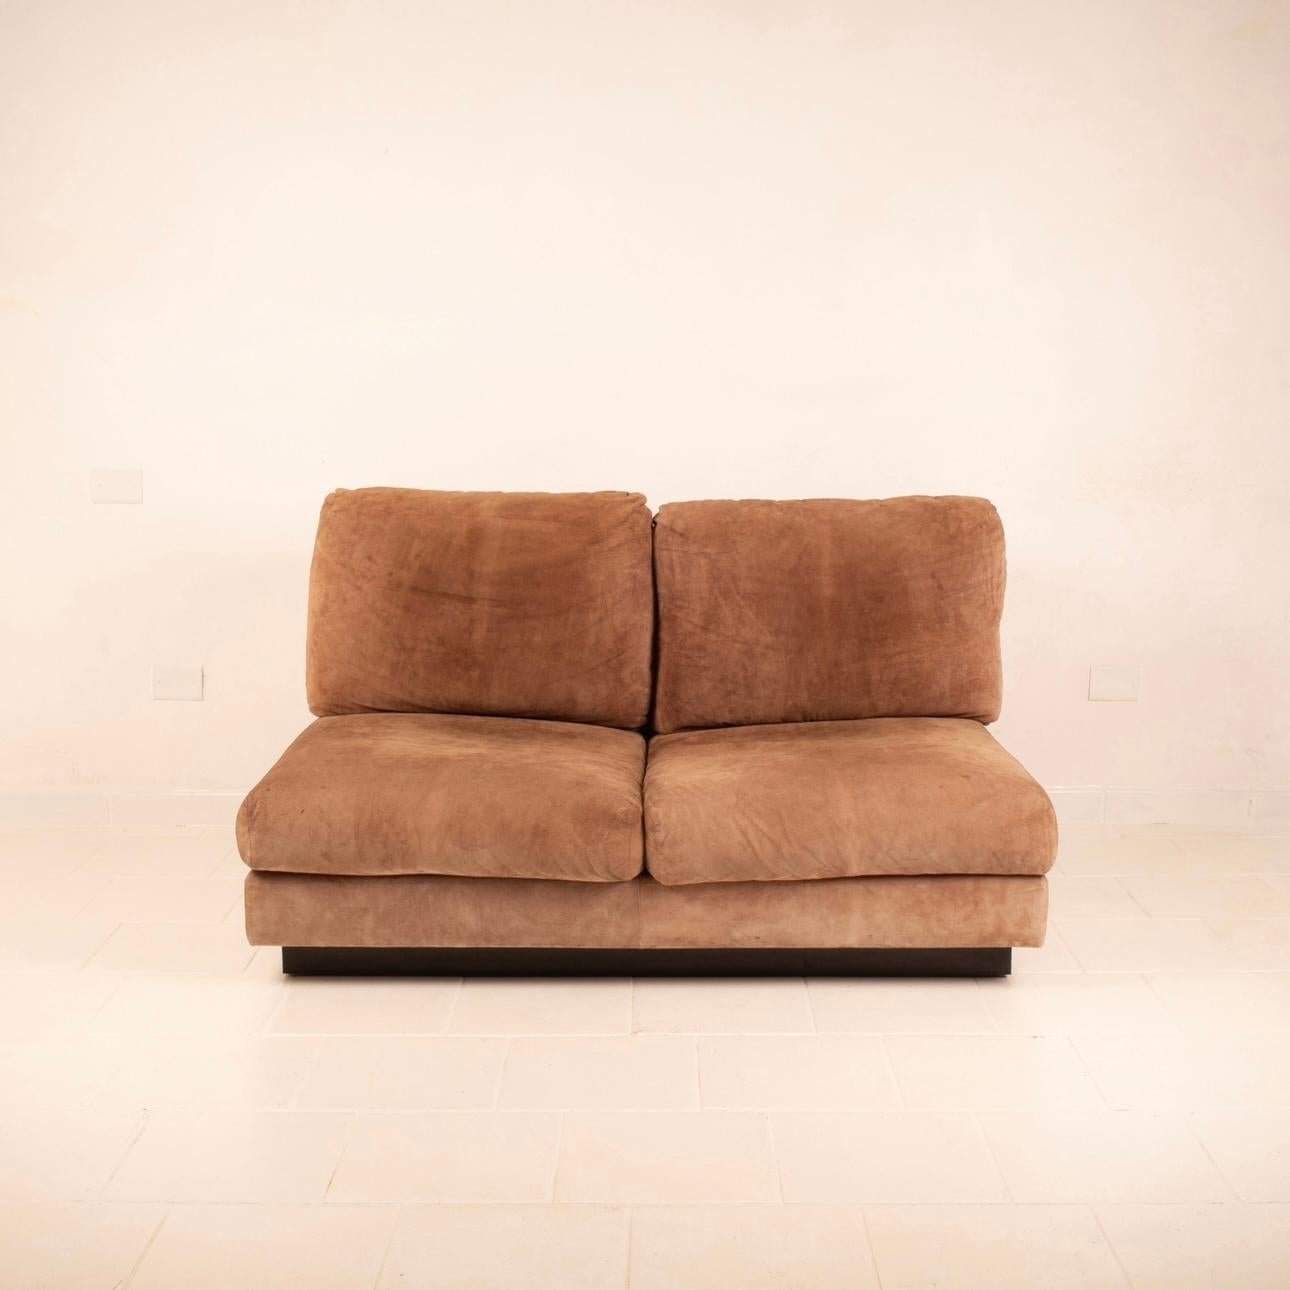 Extraordinary Super C sofa, a design icon of the 1970s designed by Willy Rizzo and produced by the prestigious house of the same name.
An incredible piece testimony to an era characterized by luxury and affluence. This sofa differs from others